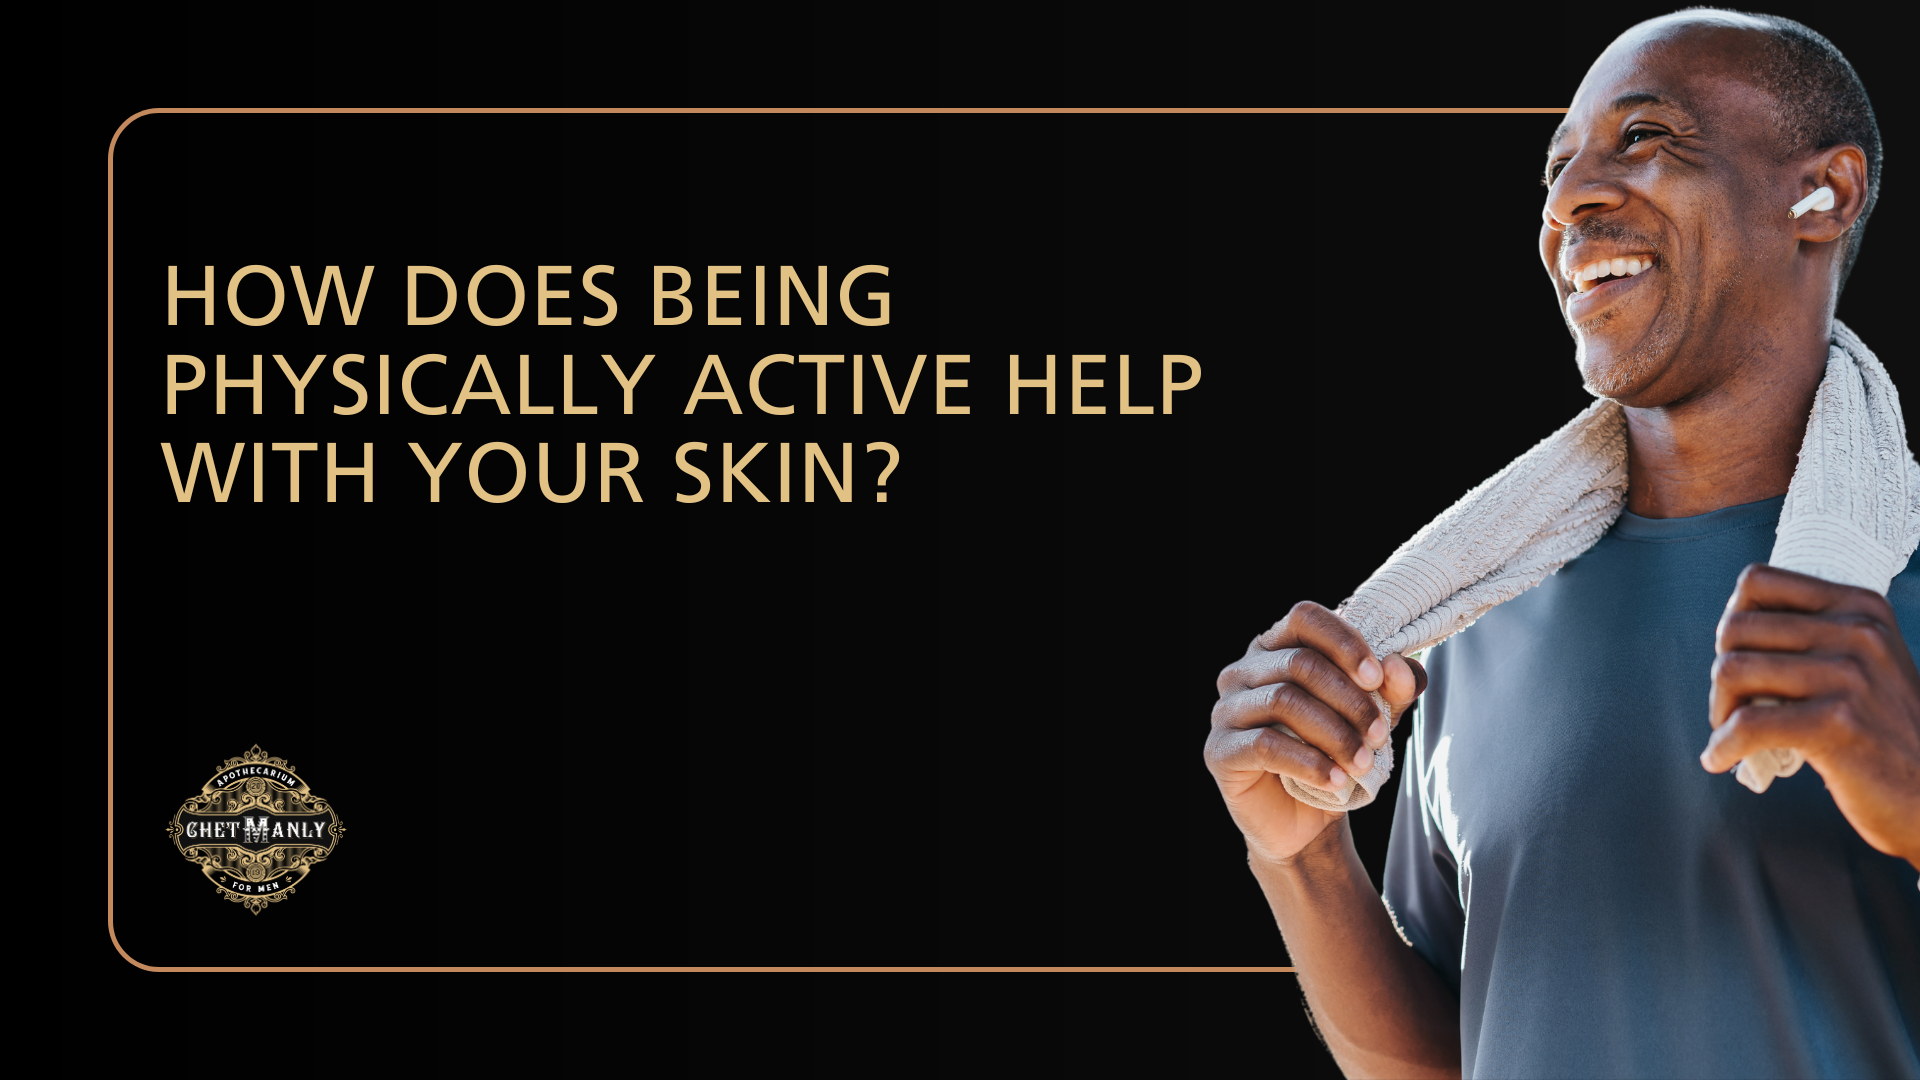 How being physically active help with your skin?